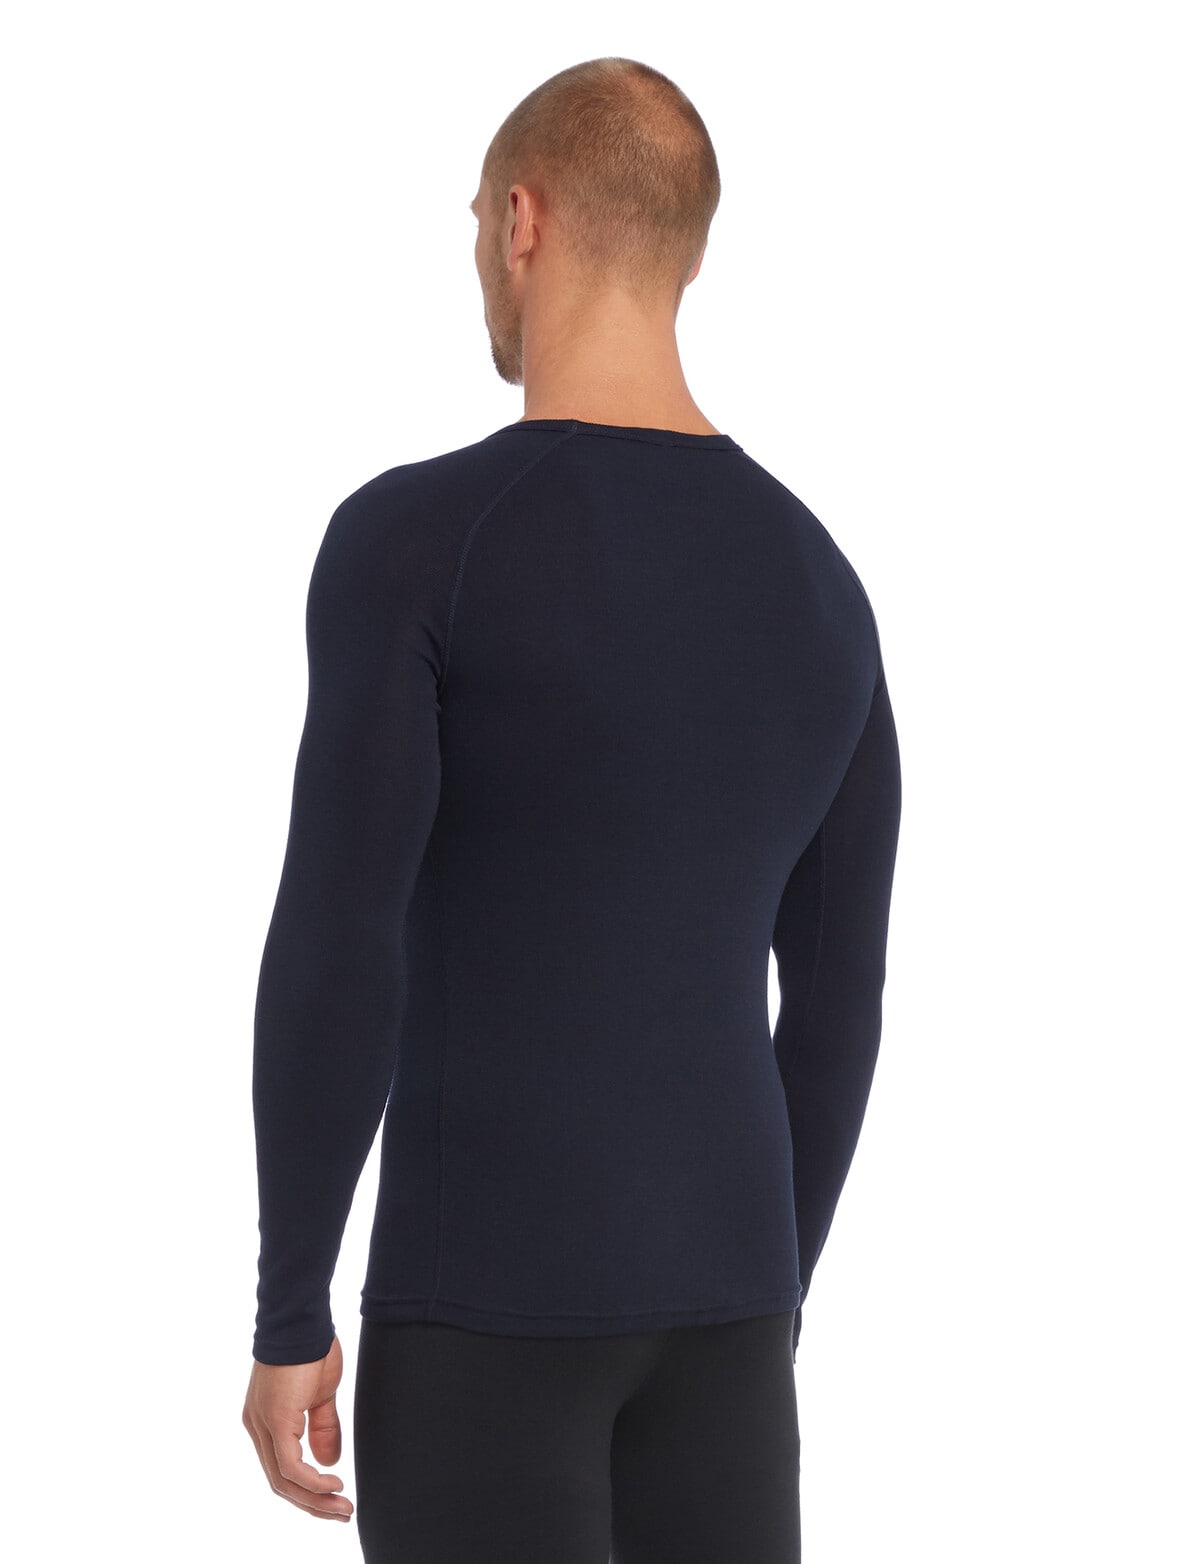 Superfit Poly Viscose Long-Sleeve Thermal Top, Navy - Thermals